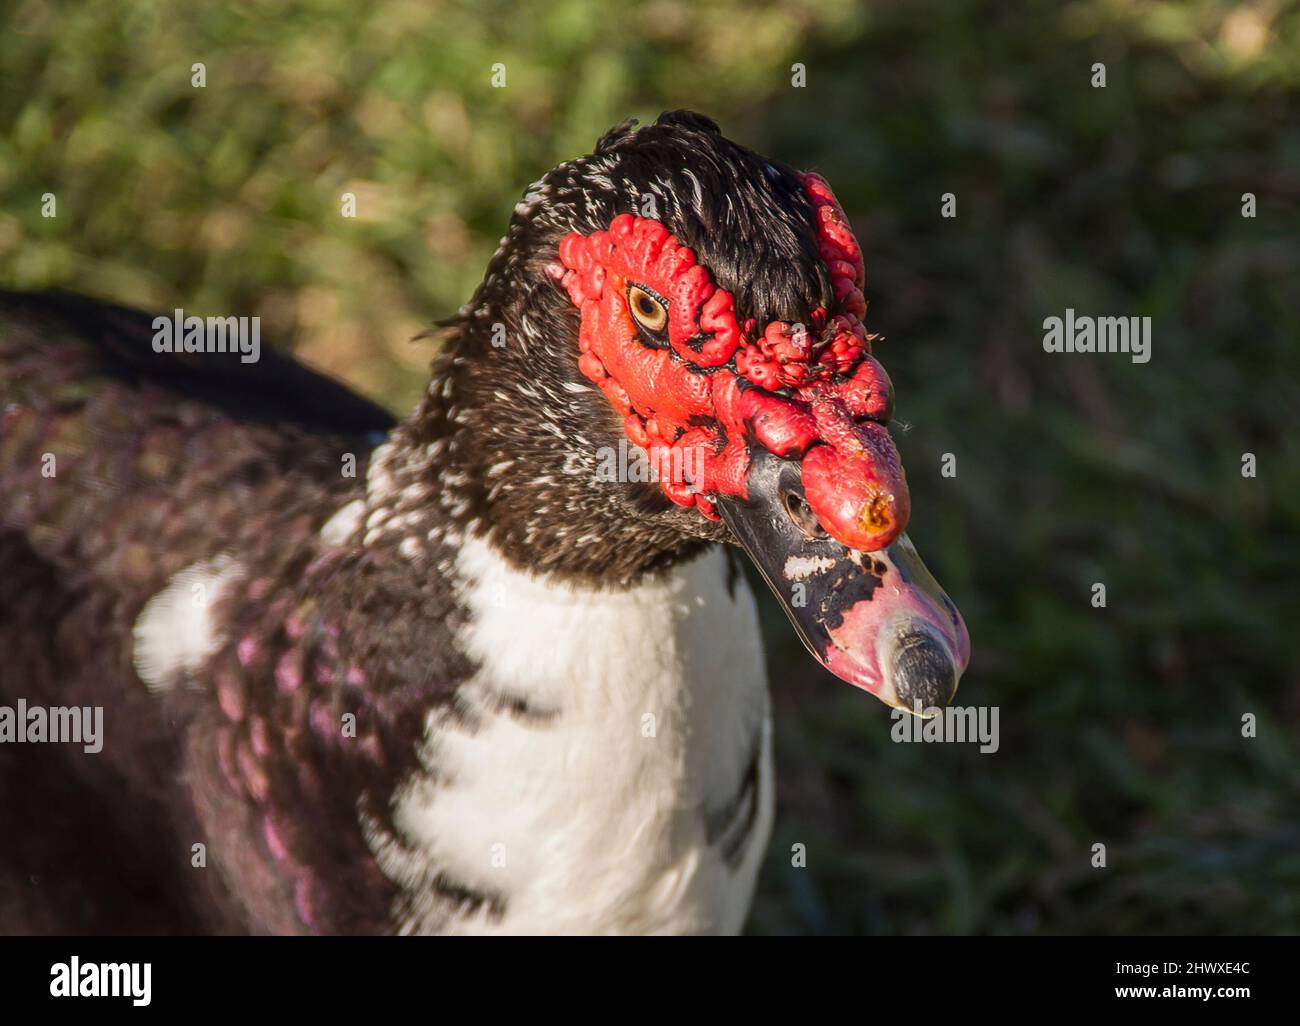 Face of Muscovy duck, Cairina moschata, introduced to Australia, native of Central, South America. Black and white with red lumps on face. Queensland. Stock Photo